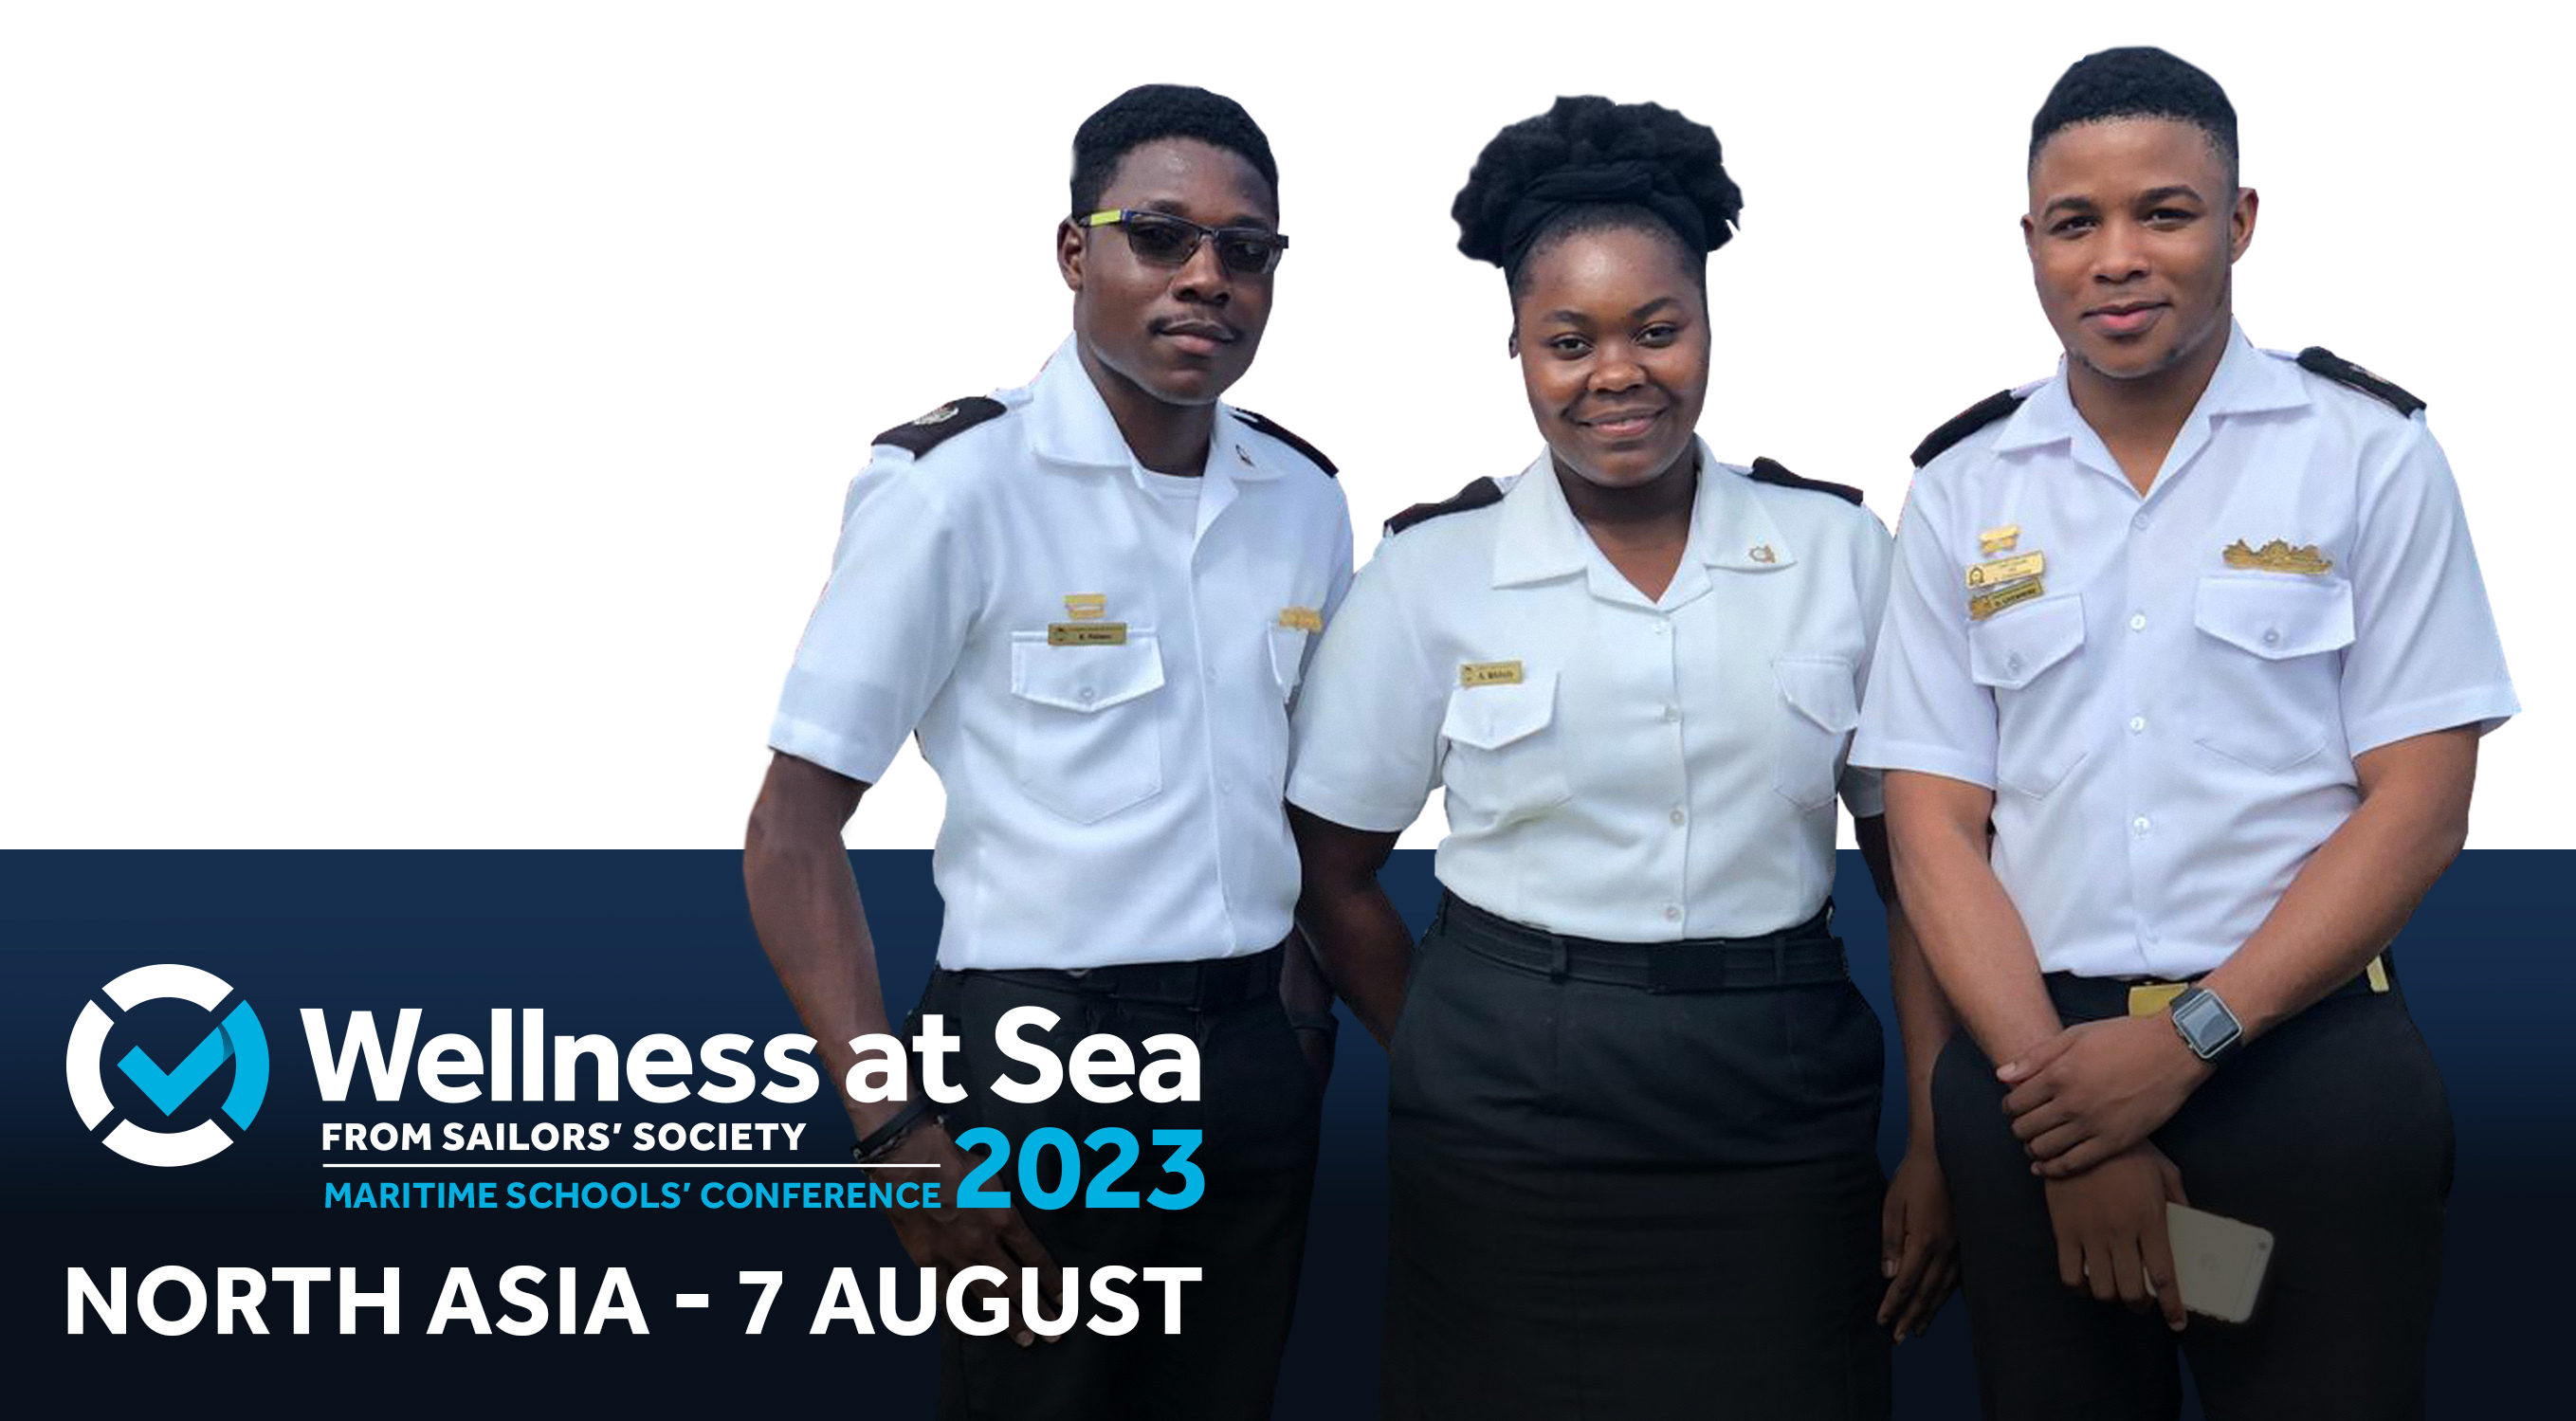 Wellness at Sea North Asia Cadet Confernce